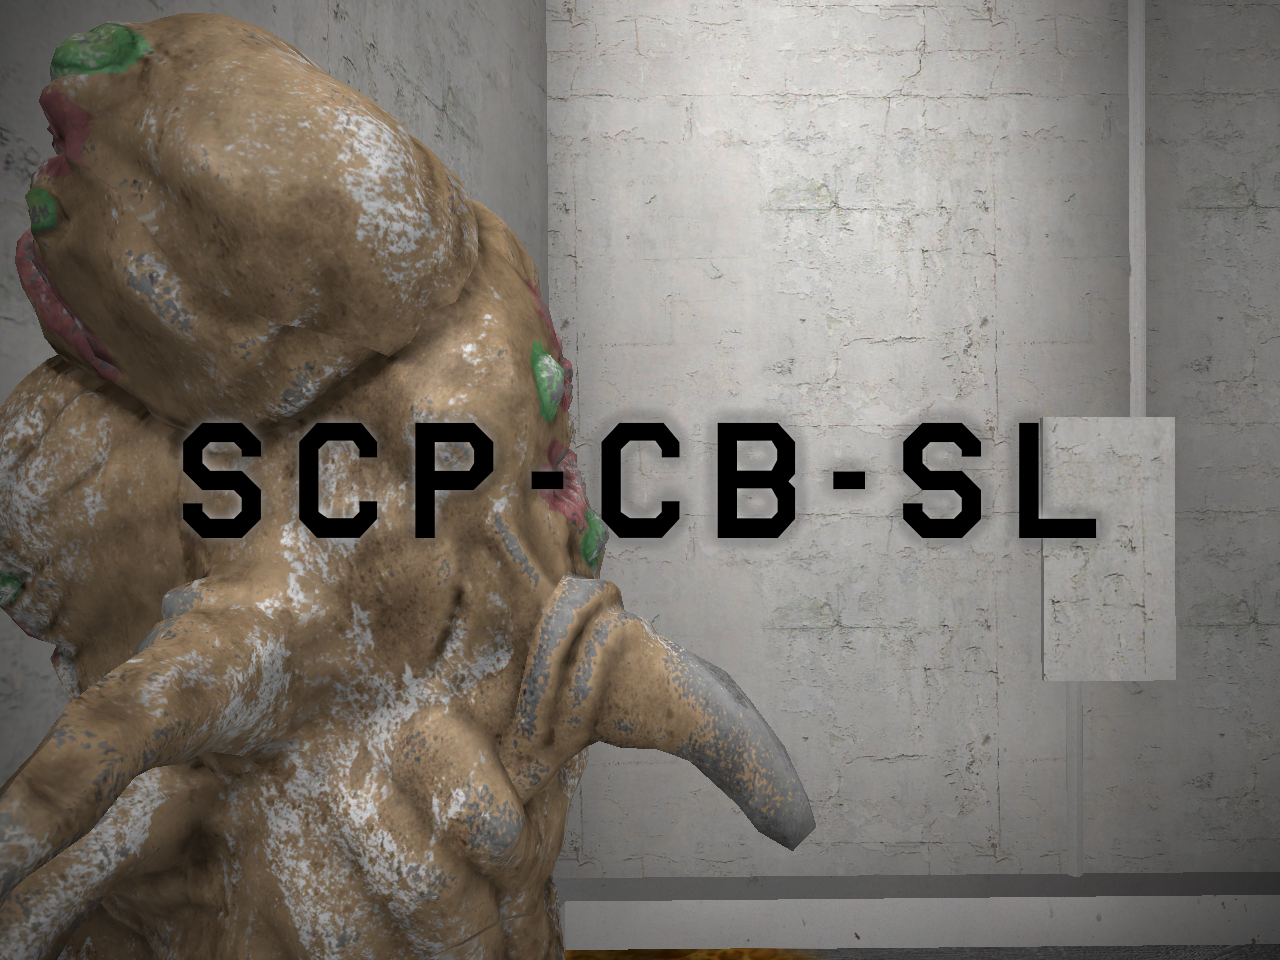 Containing SCP 106.. GATE A & B ENDINGS - SCP Containment Breach - Ultimate  Edition Mod 